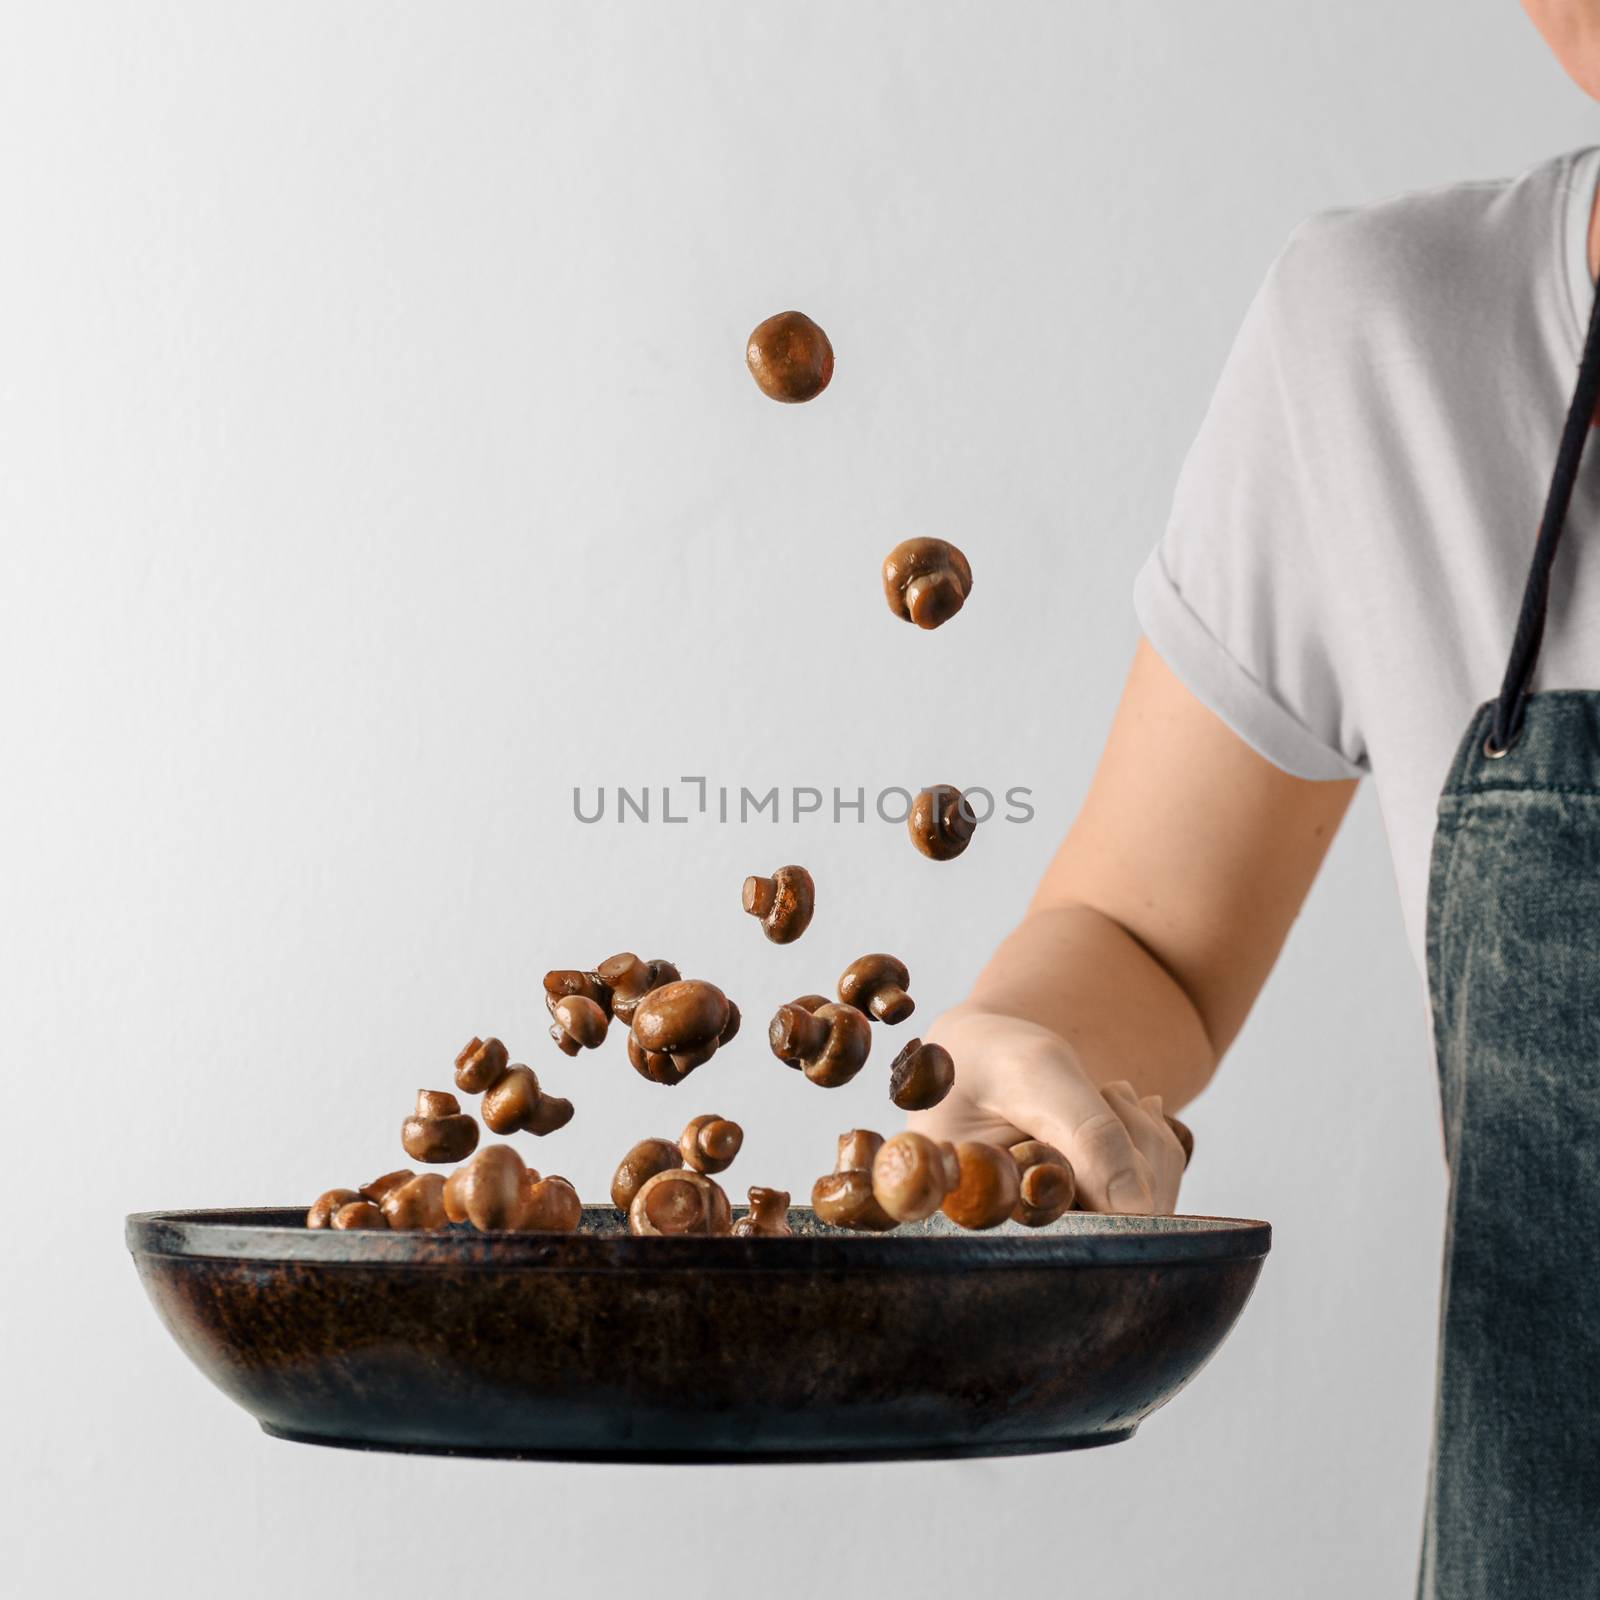 Chef woman preparing mini champignons in skillet frying them. Flying ingredients over pan with copy space. Hotel and caternig business, menu in restaurants, book of recipes concept. White background